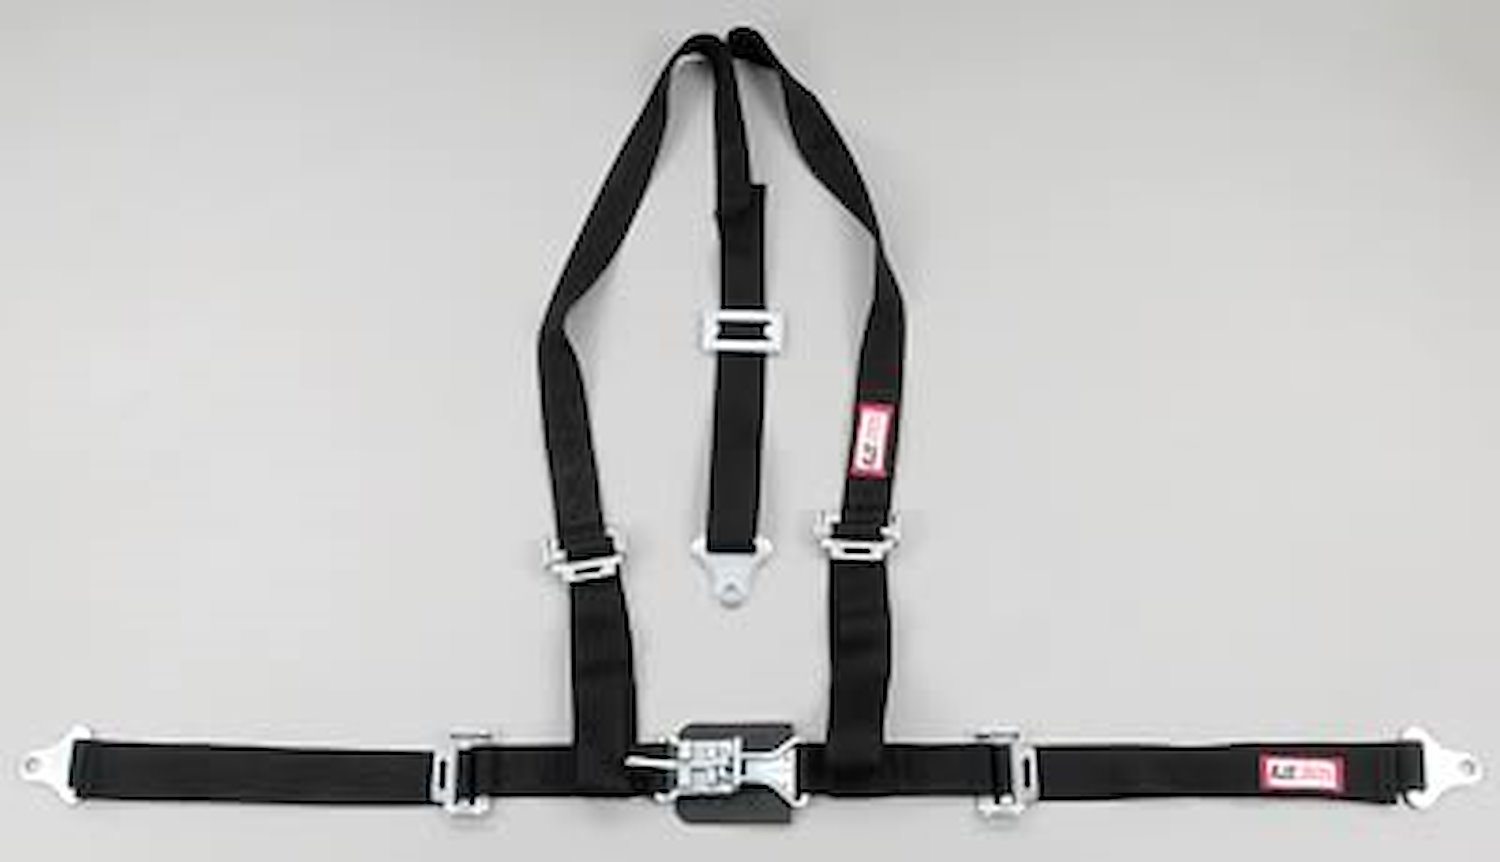 NON-SFI L&L HARNESS 2 PULL UP Lap Belt BOLT SEWN IN SEWN IN 2 S.H. INDIVIDUAL FLOOR Mount WRAP/BOLT RED